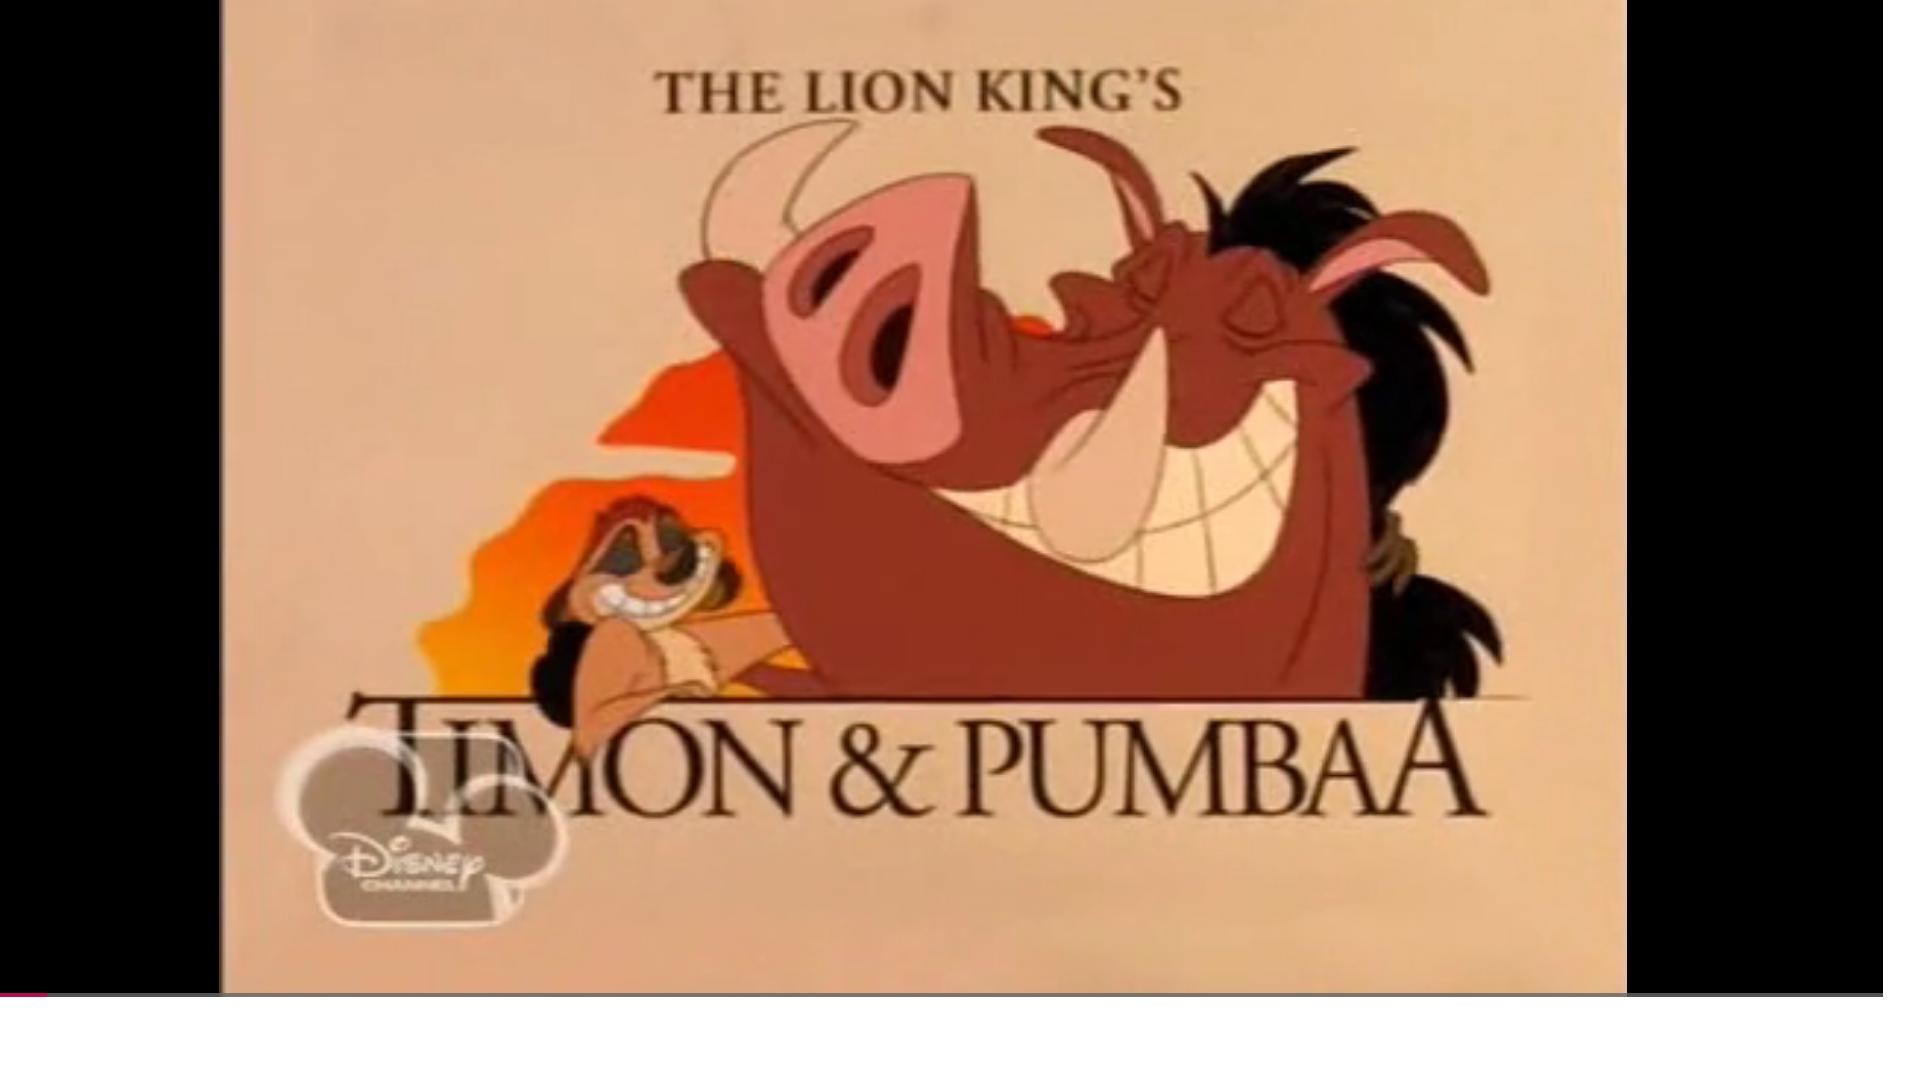 1920x1080 Timon and Pumba images Friend In Deed.JPG HD wallpaper and background photos